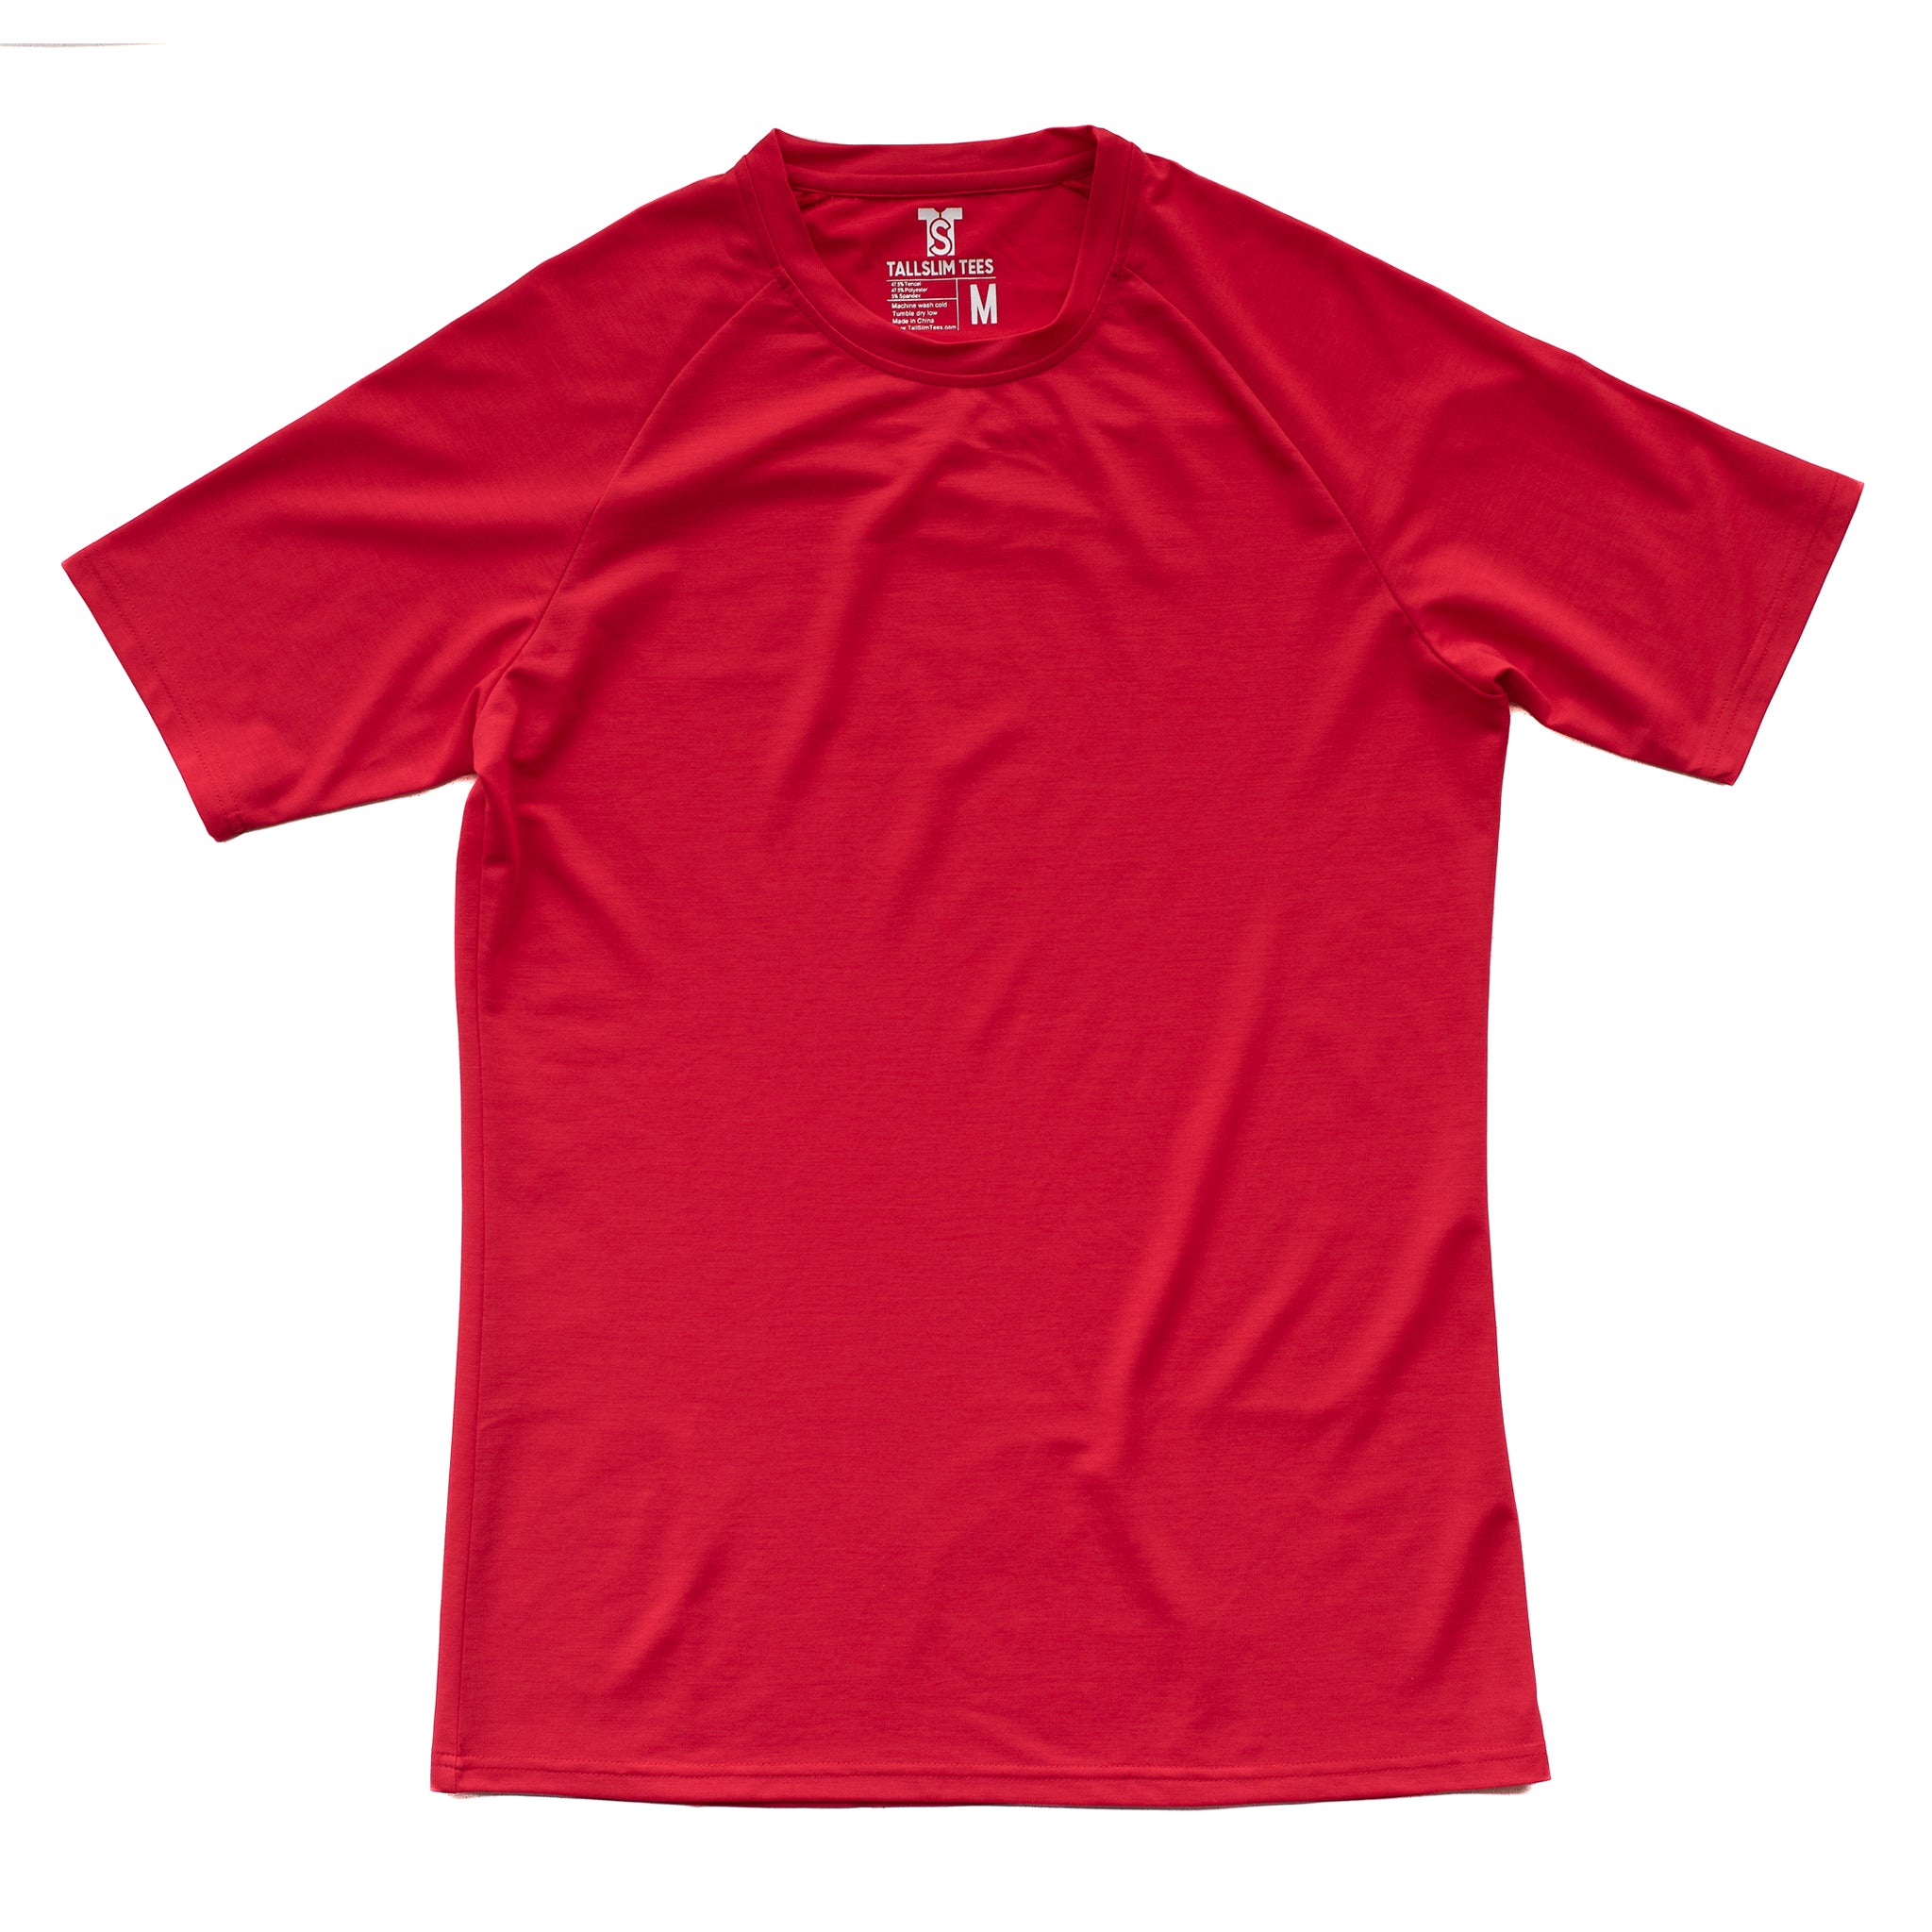 Red Dry-Lite Triblend Athletic Shirt for Tall Slim Men